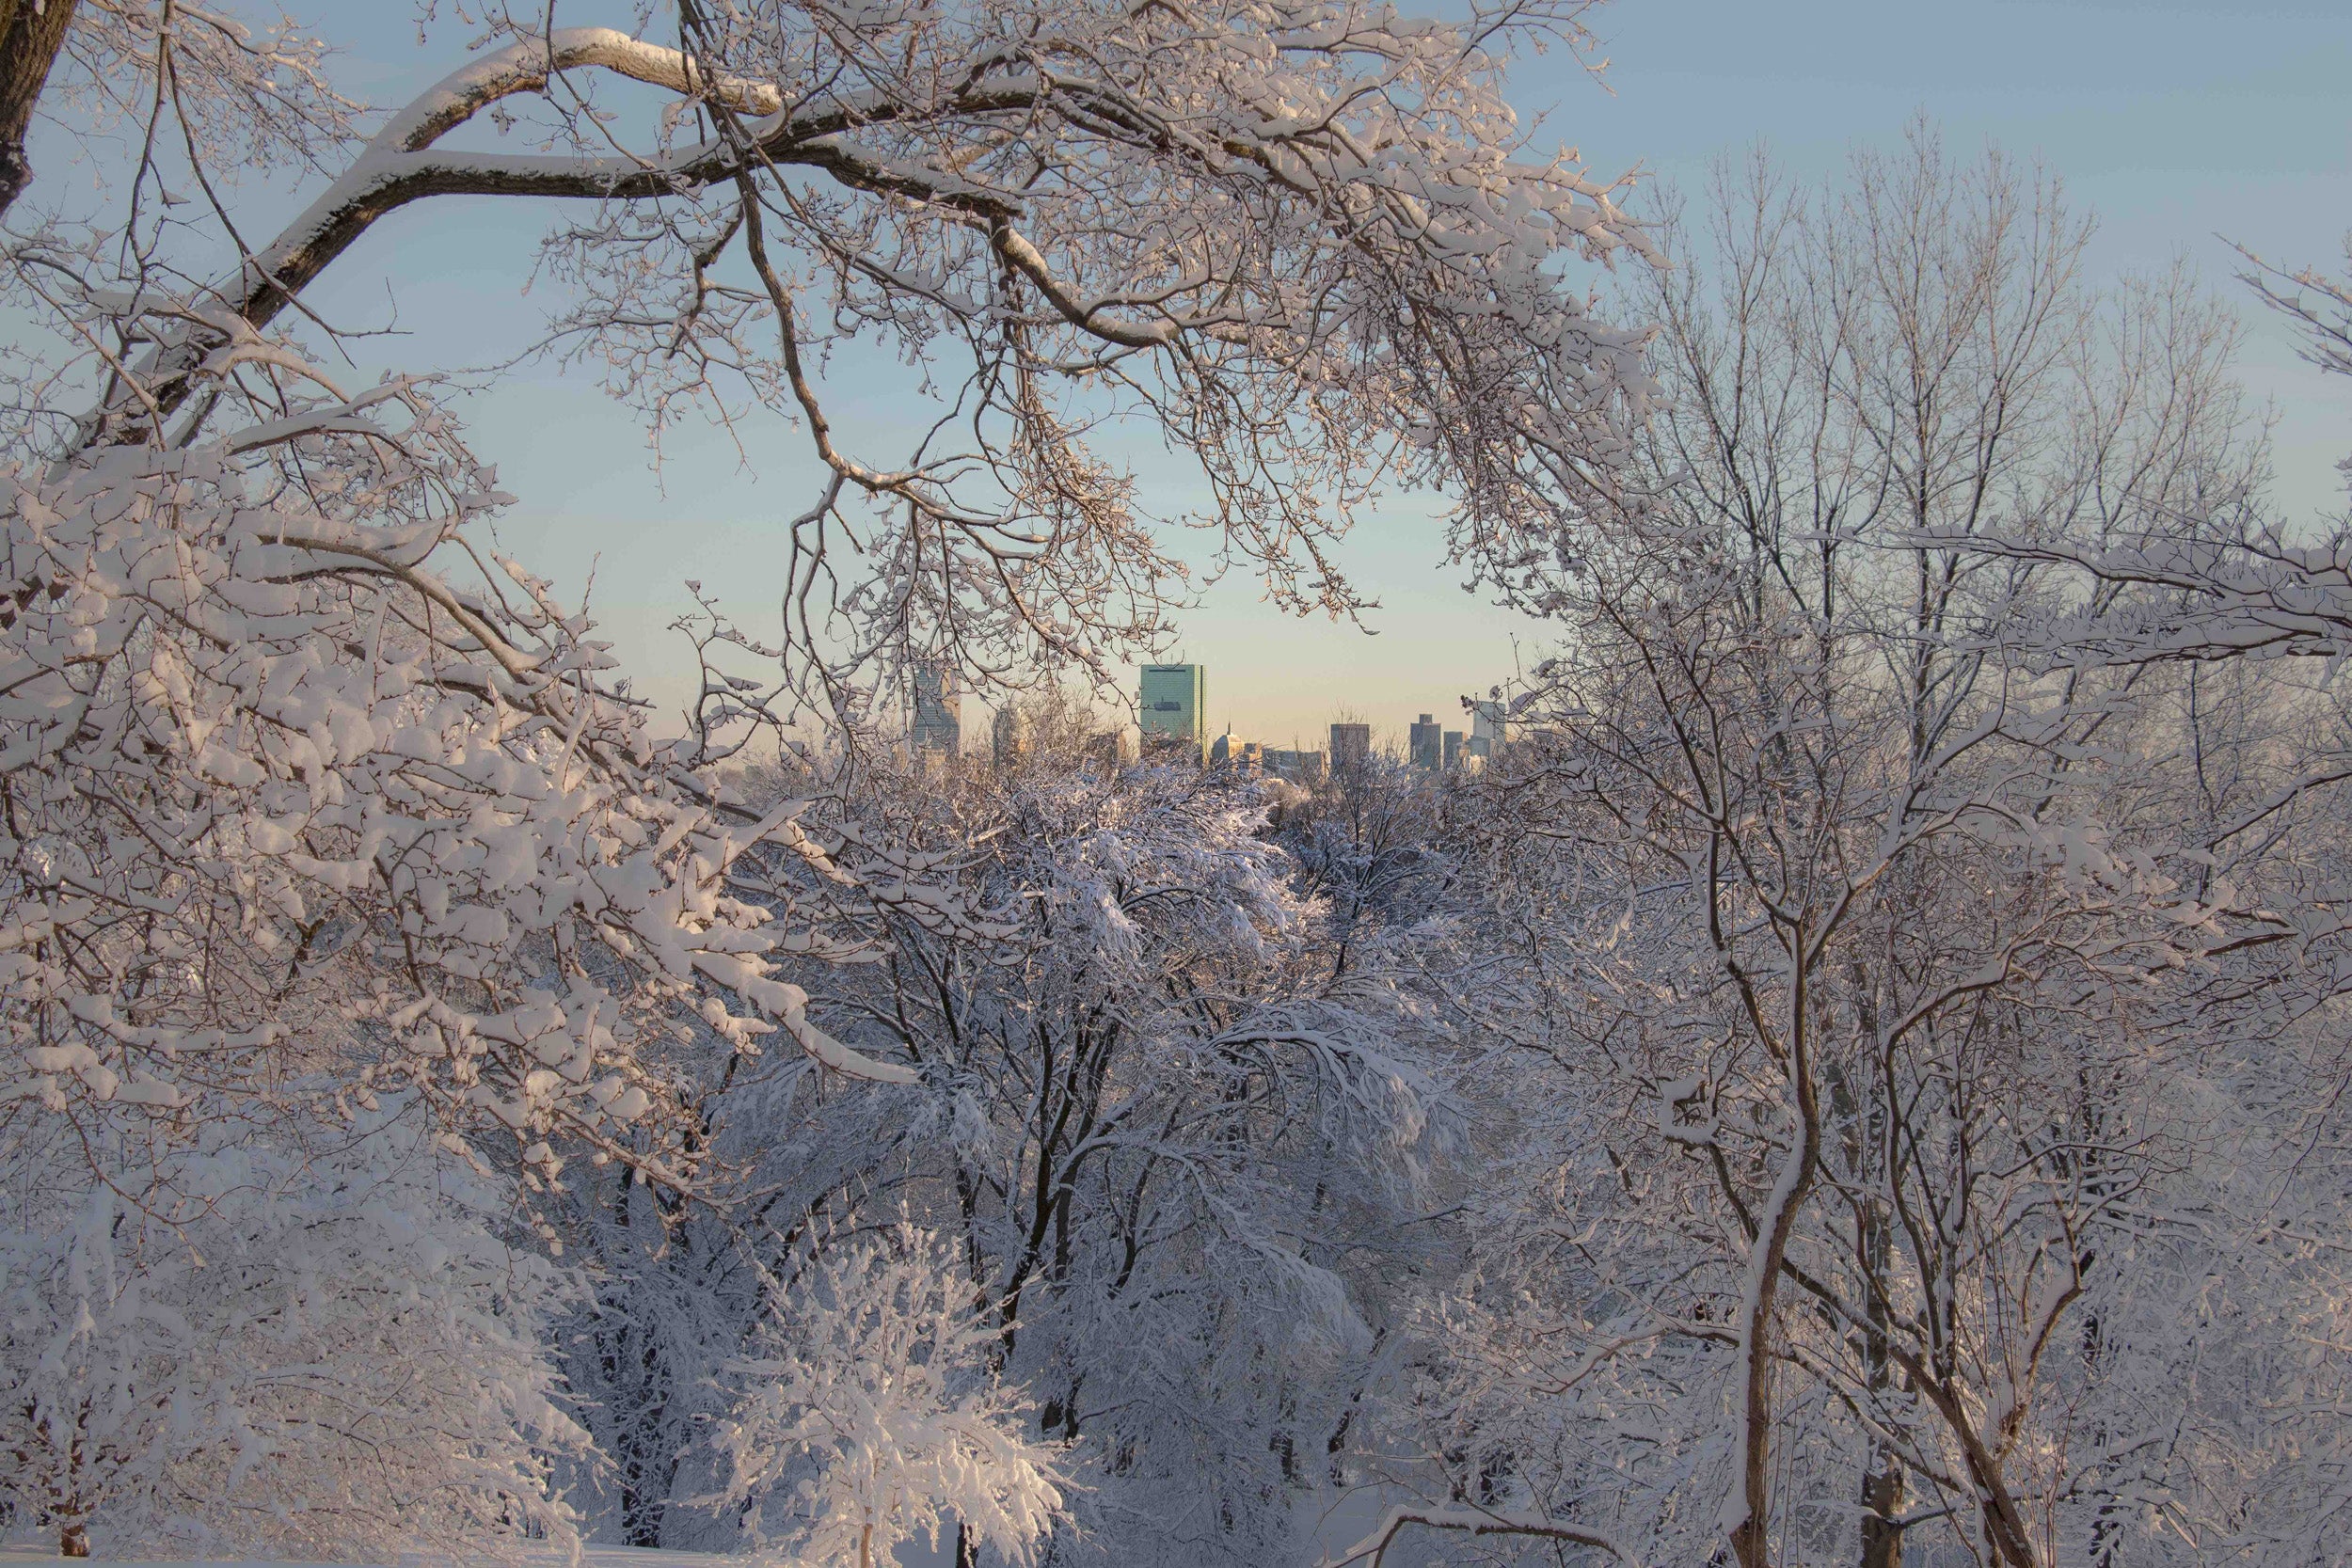 View of Boston skyline from snowy Arnold Arboretum.